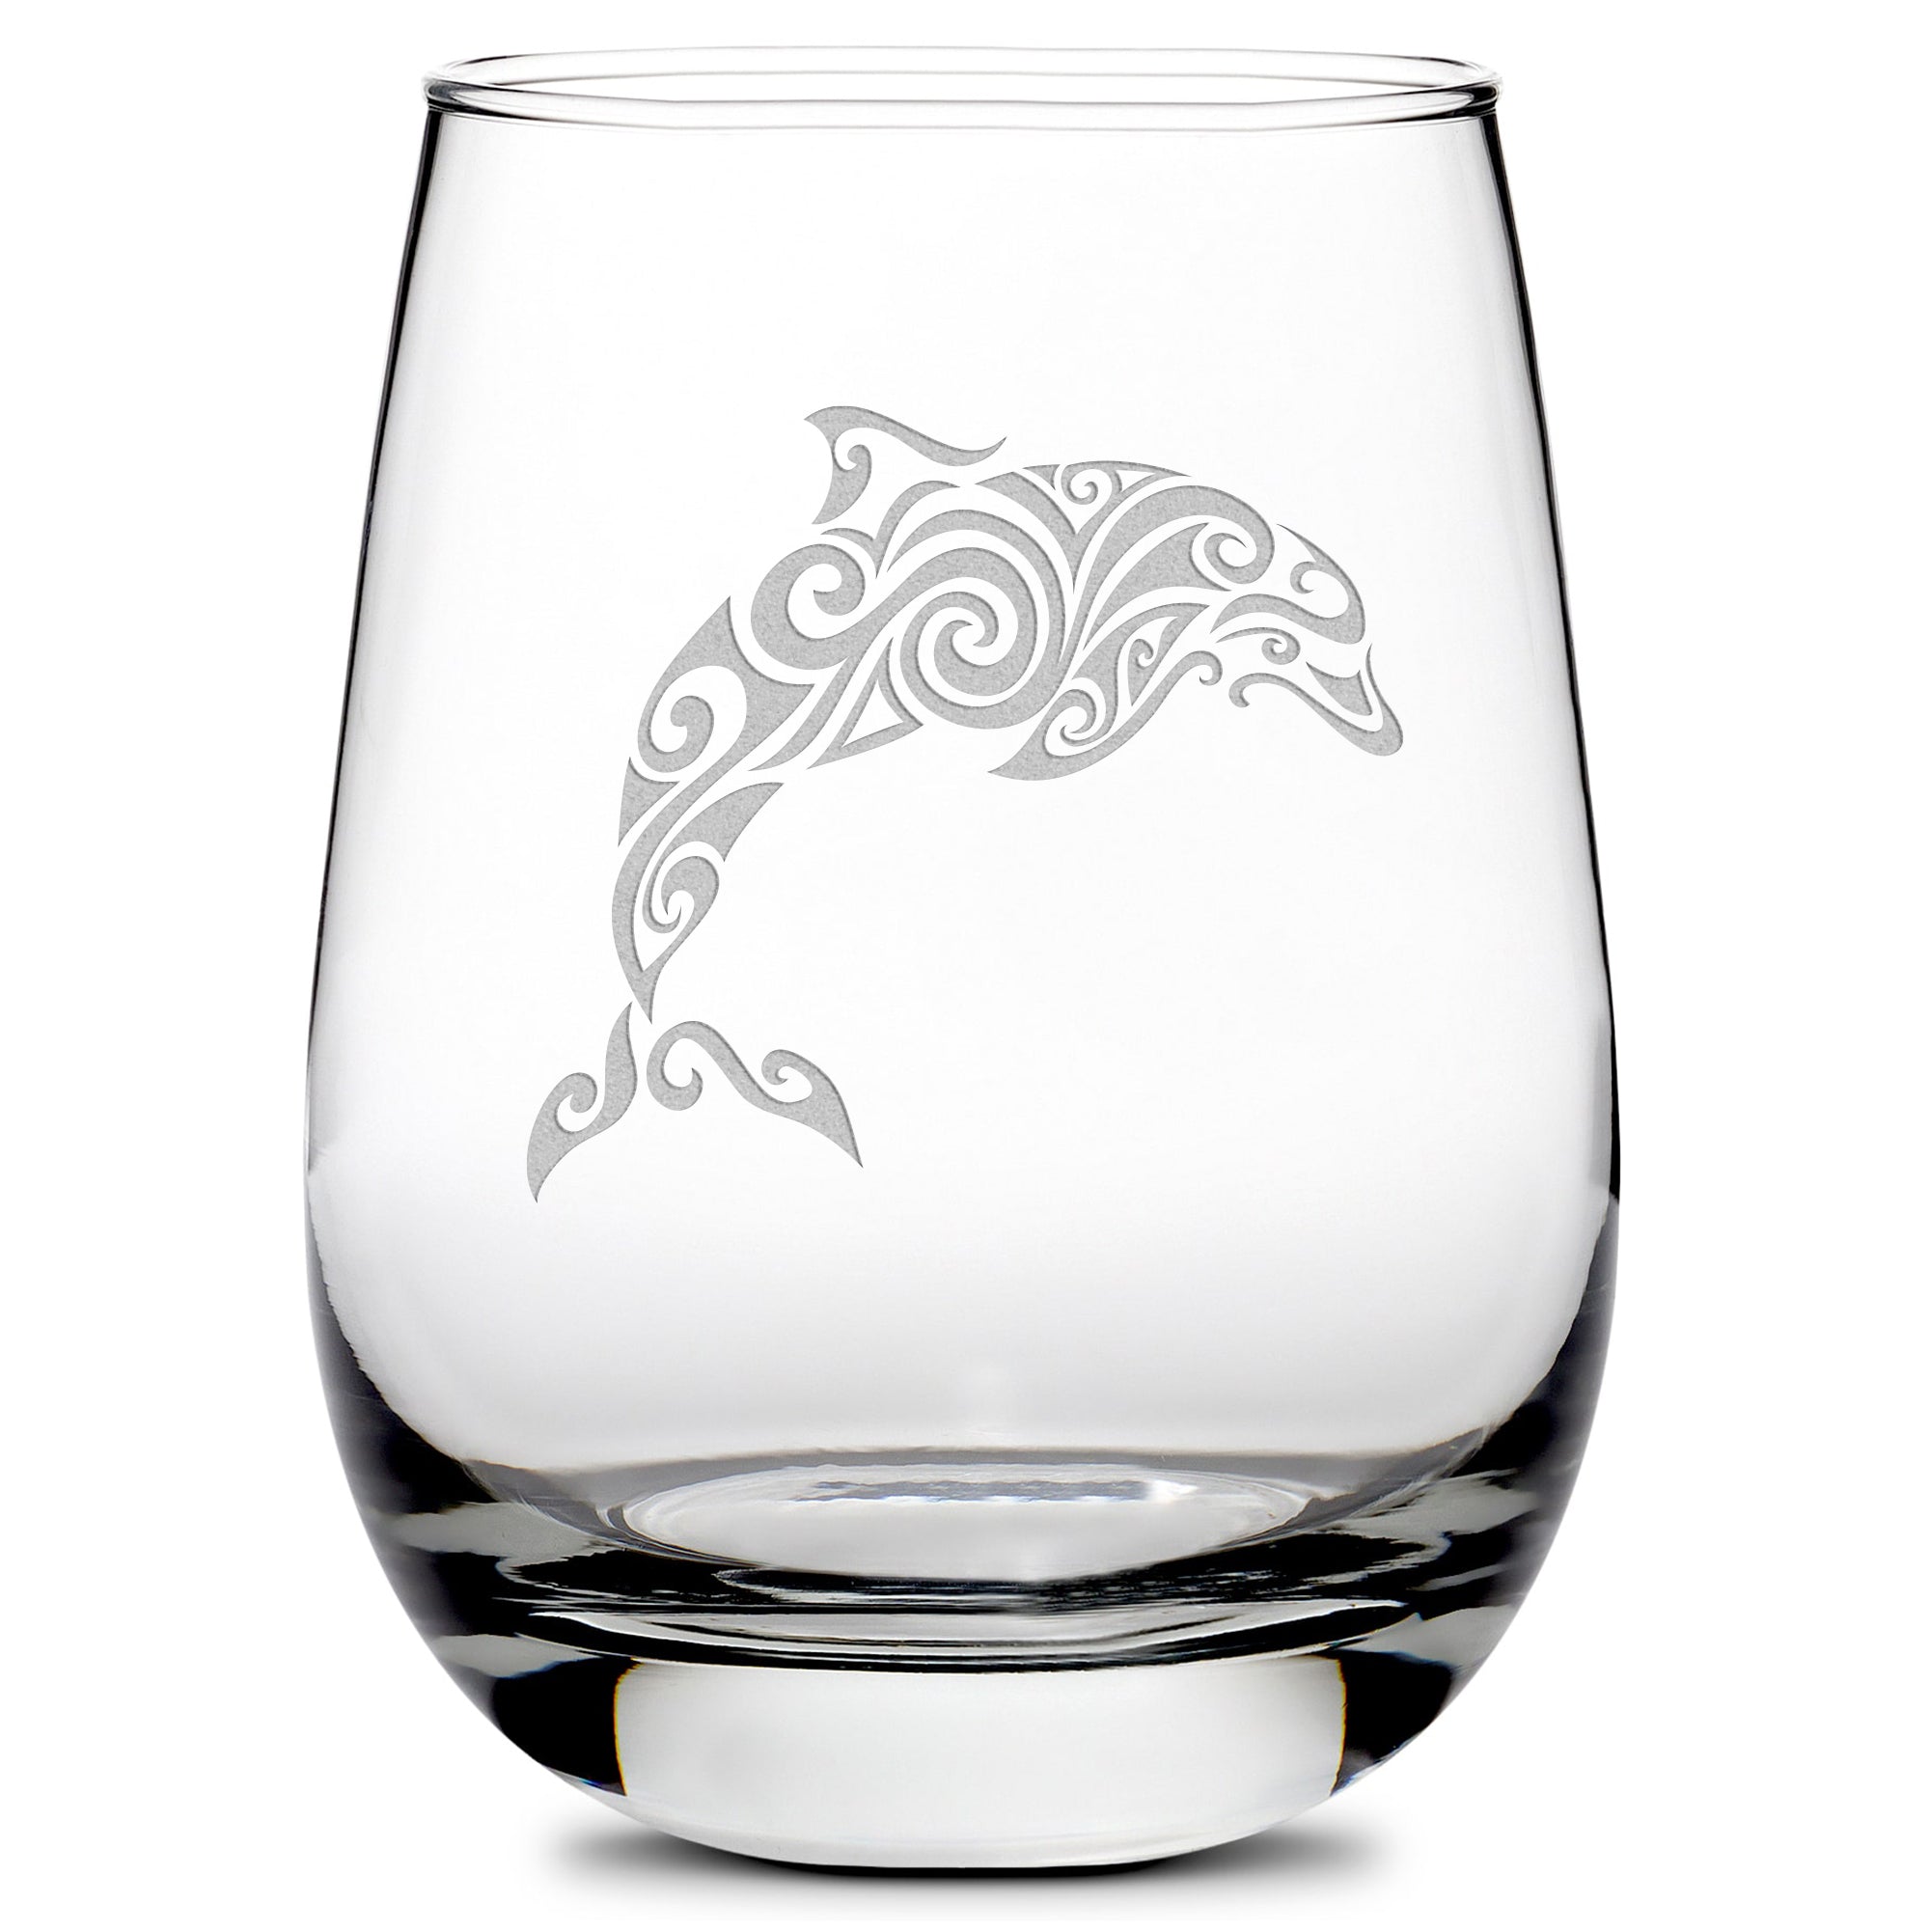 Premium Wine Glass, Dolphin Design, 16oz, Laser Etched or Hand Etched